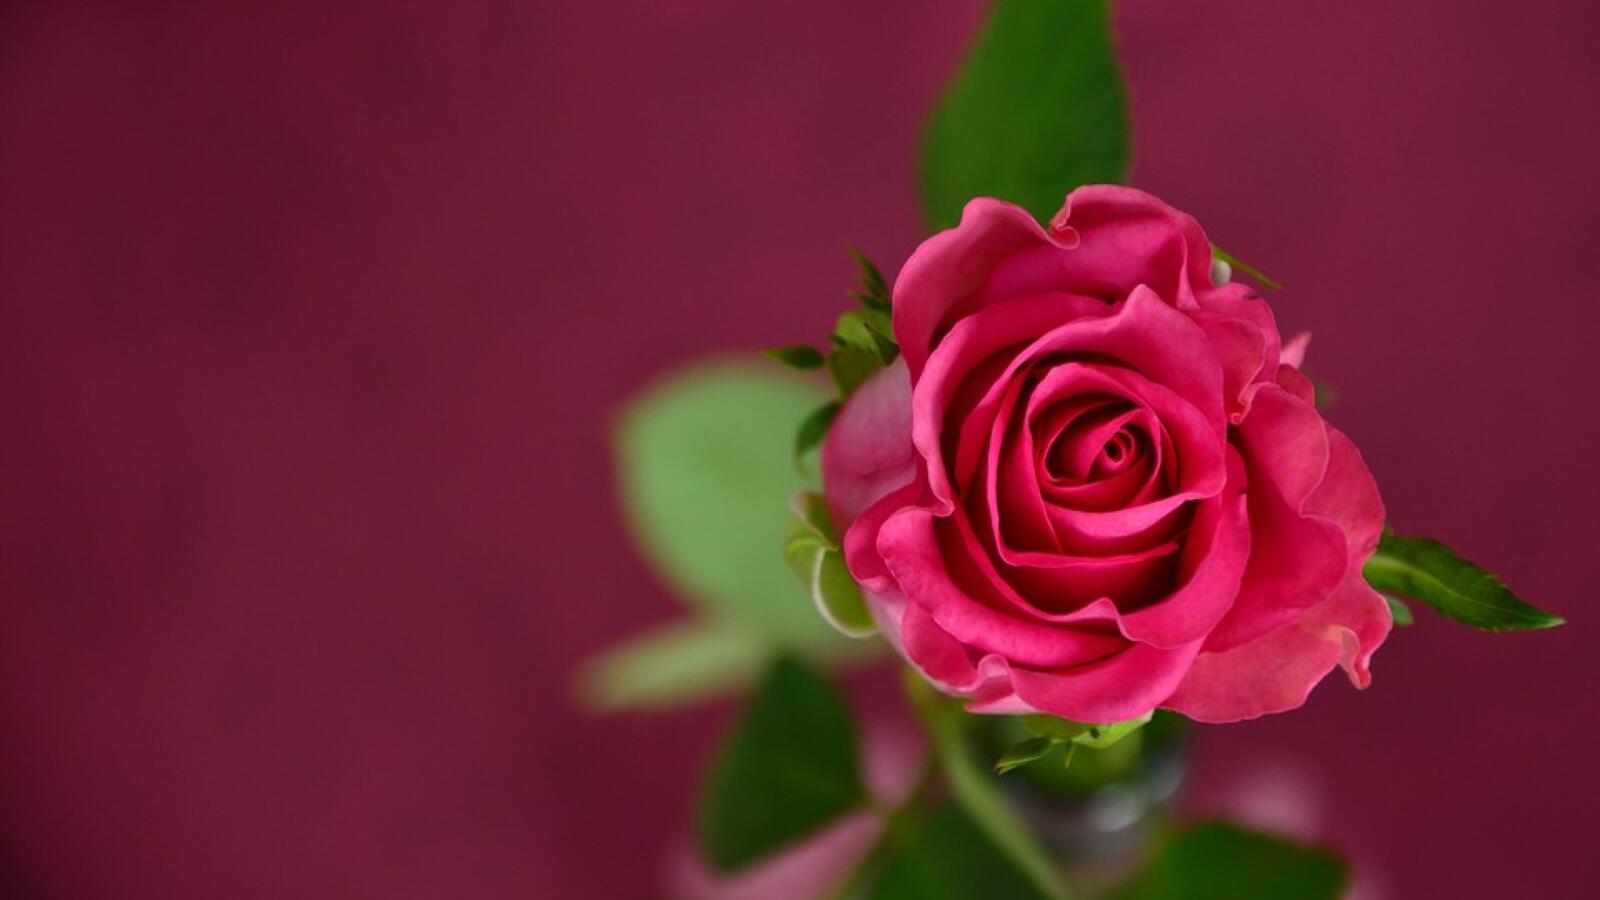 Wallpapers background red rose on the desktop